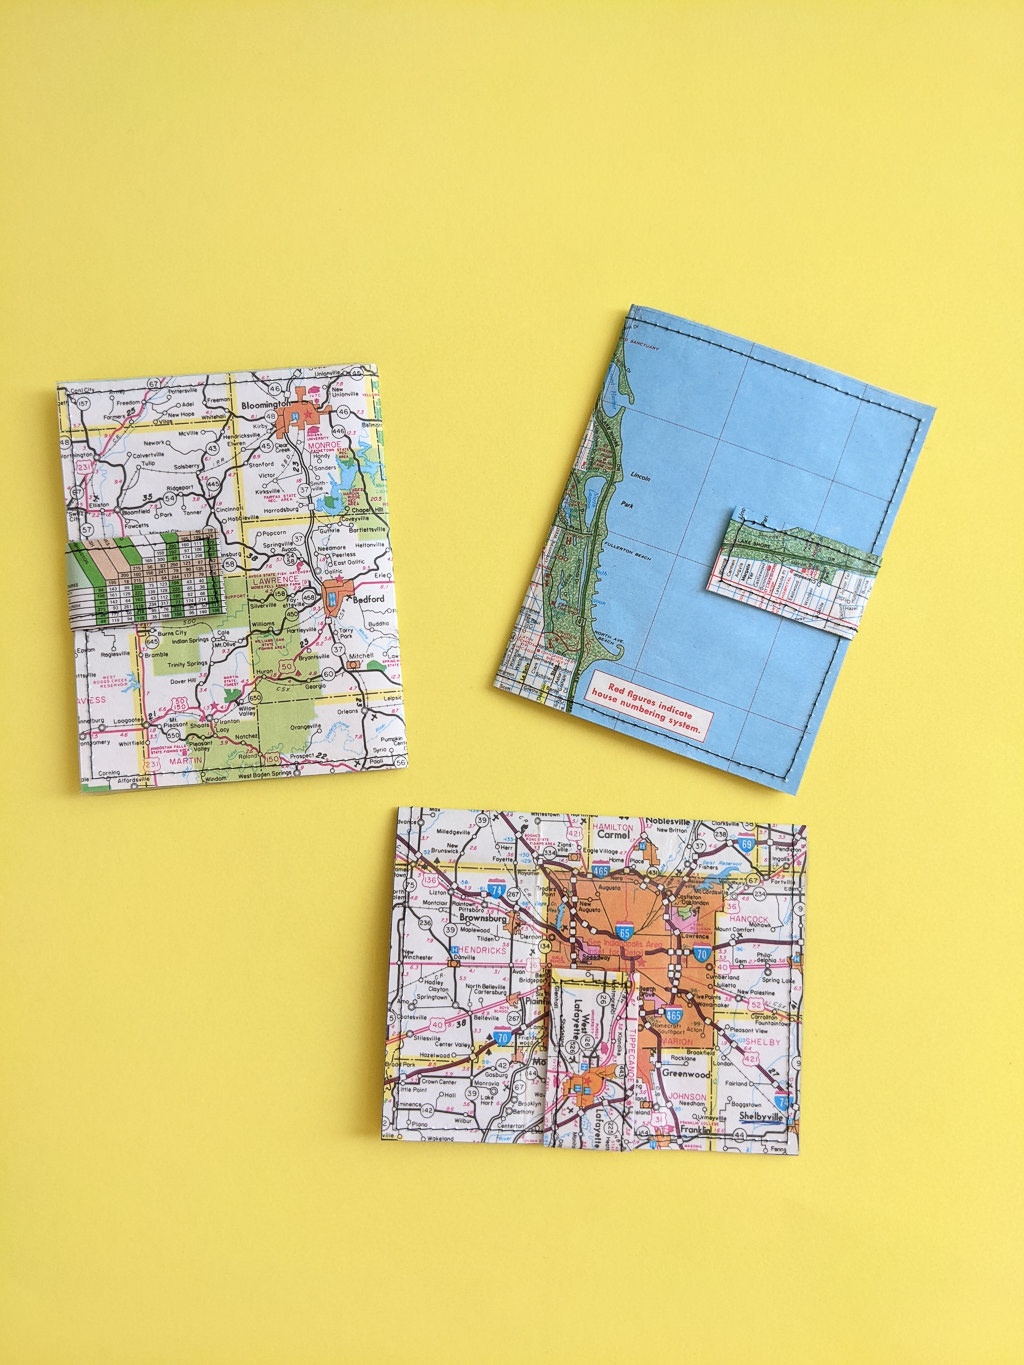 DIY card holder craft tutorial from recycled maps, books or decorative paper and vinyl